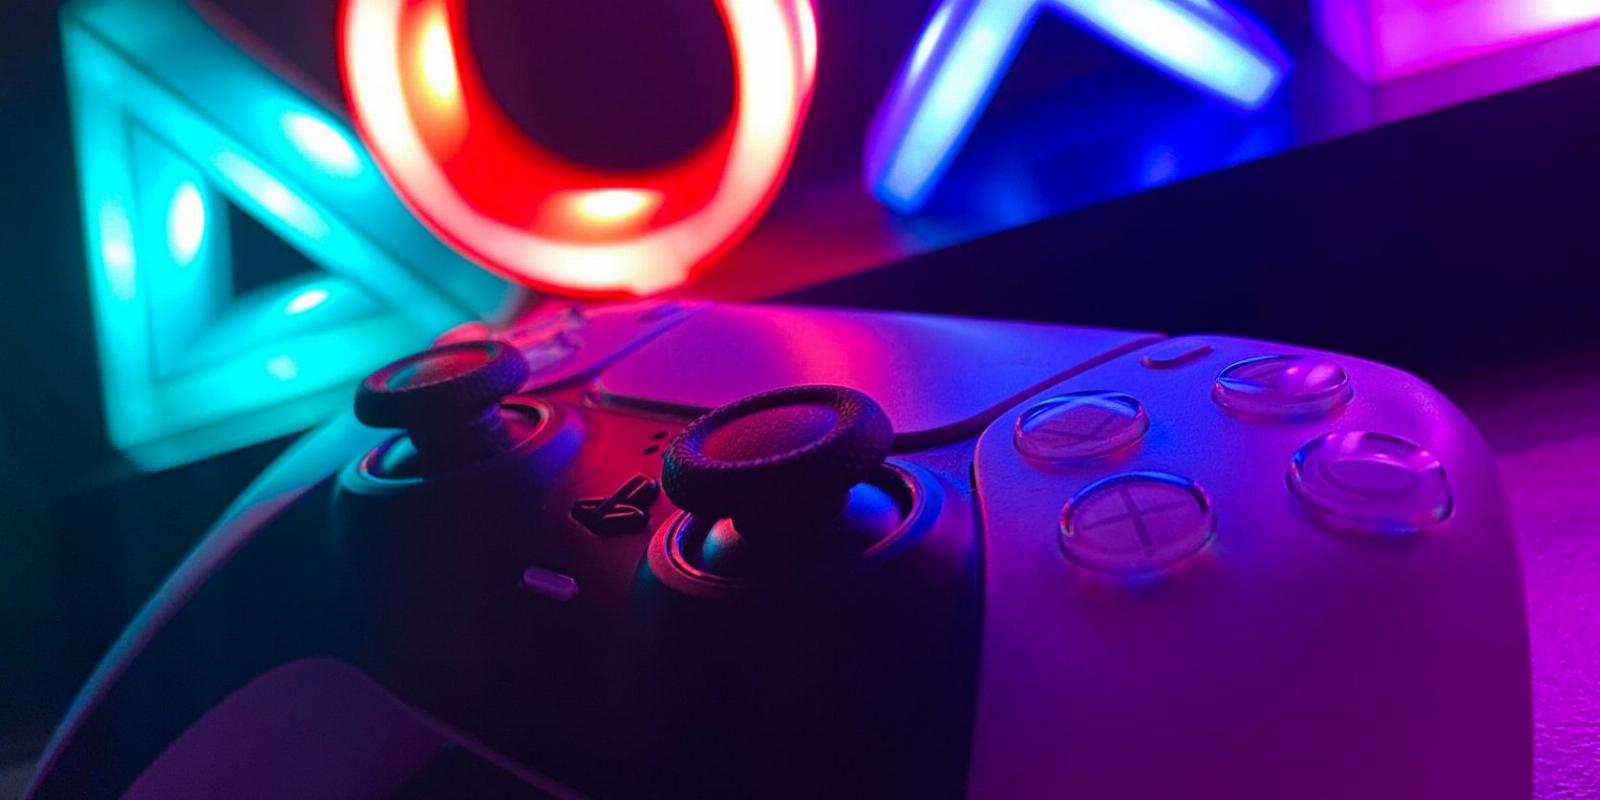 It’s Official: You Should Finally Be Able to Buy a PS5 in 2023